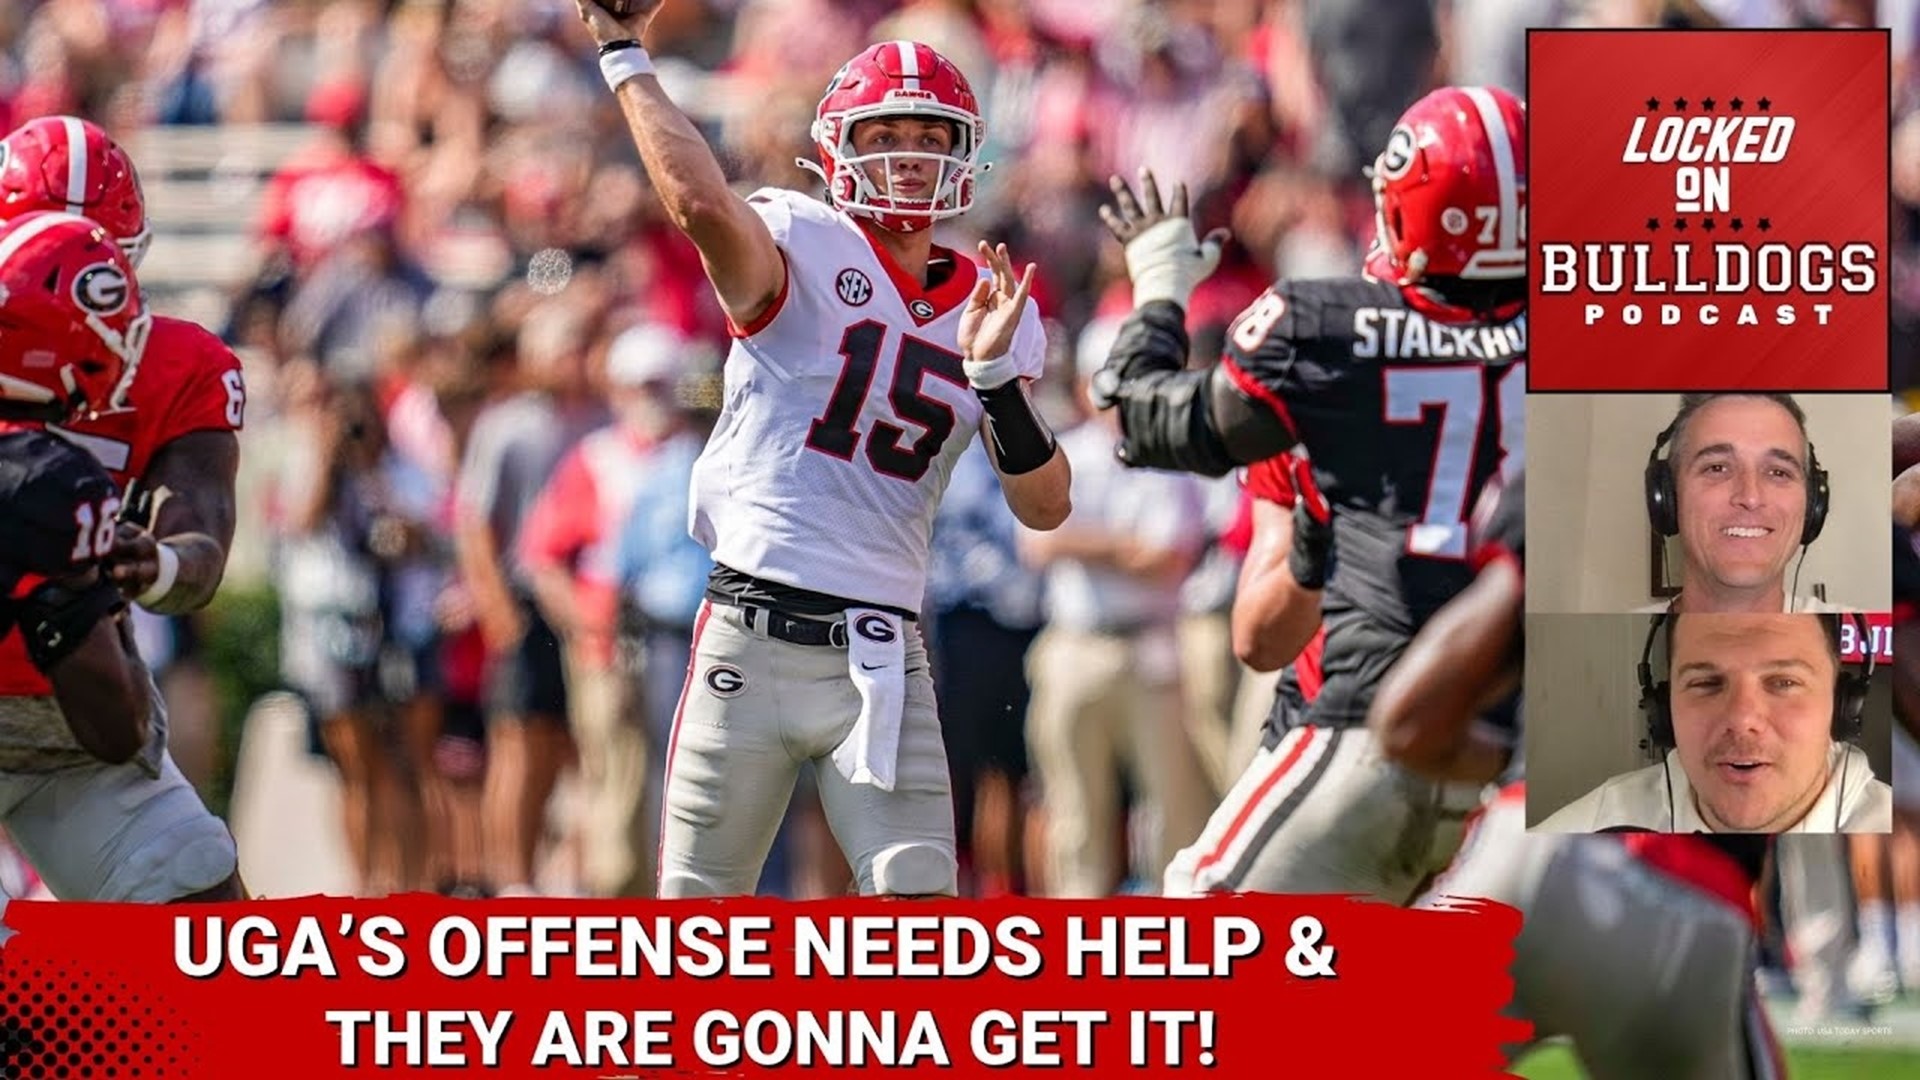 Georgia Football has the perfect opportunity to get right on offense on Saturday...